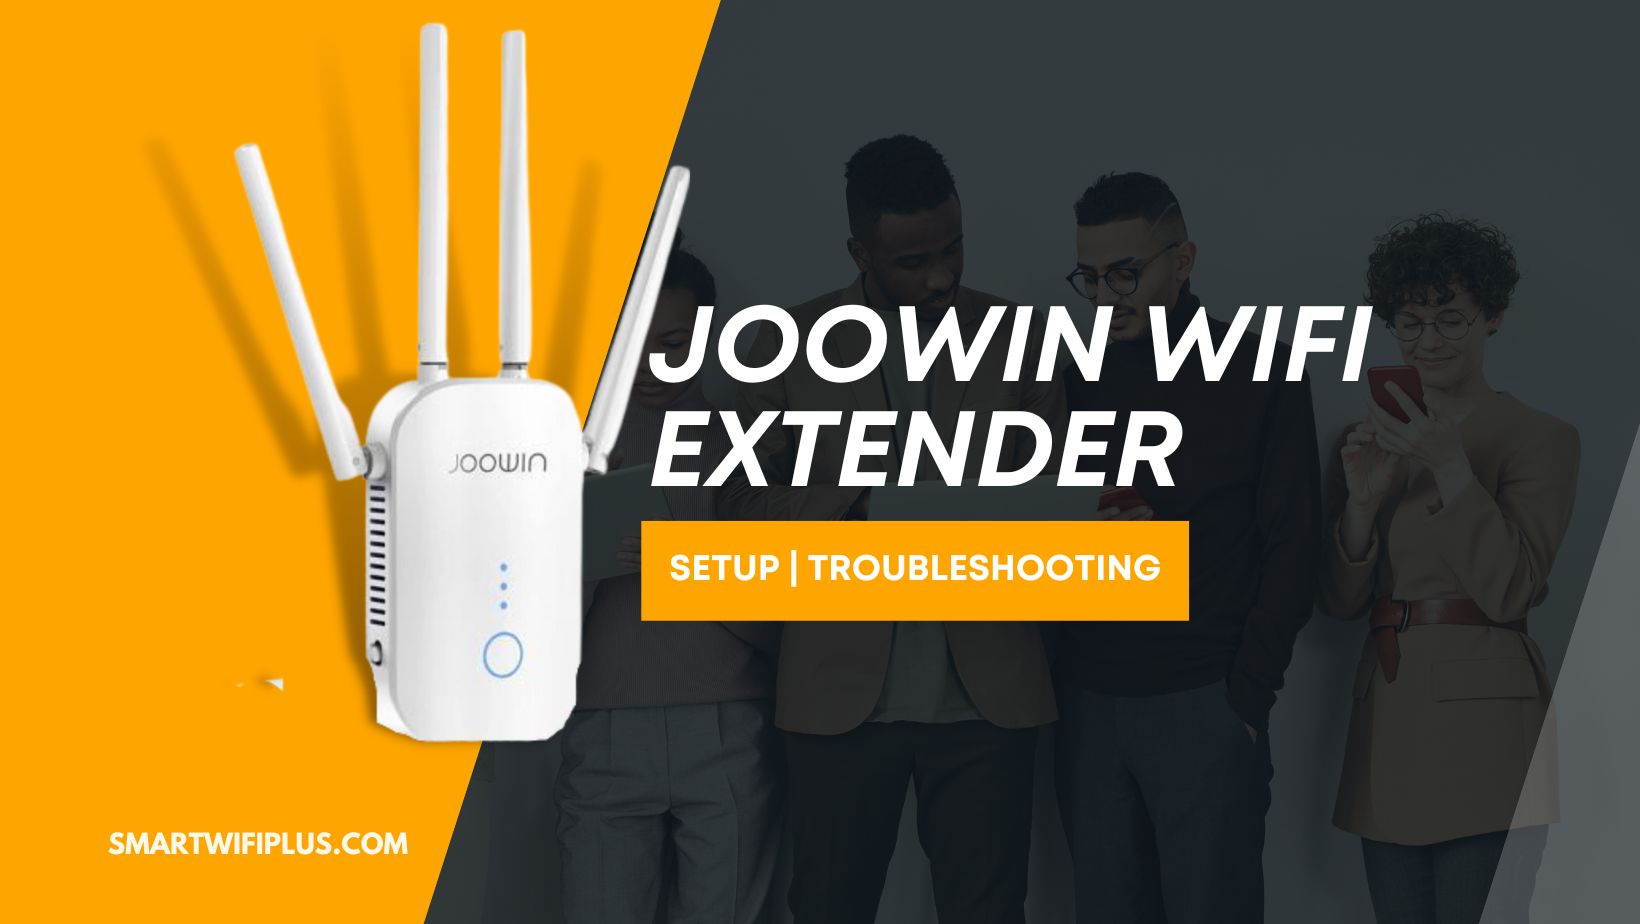 How to set up a Joowin WiFi extender